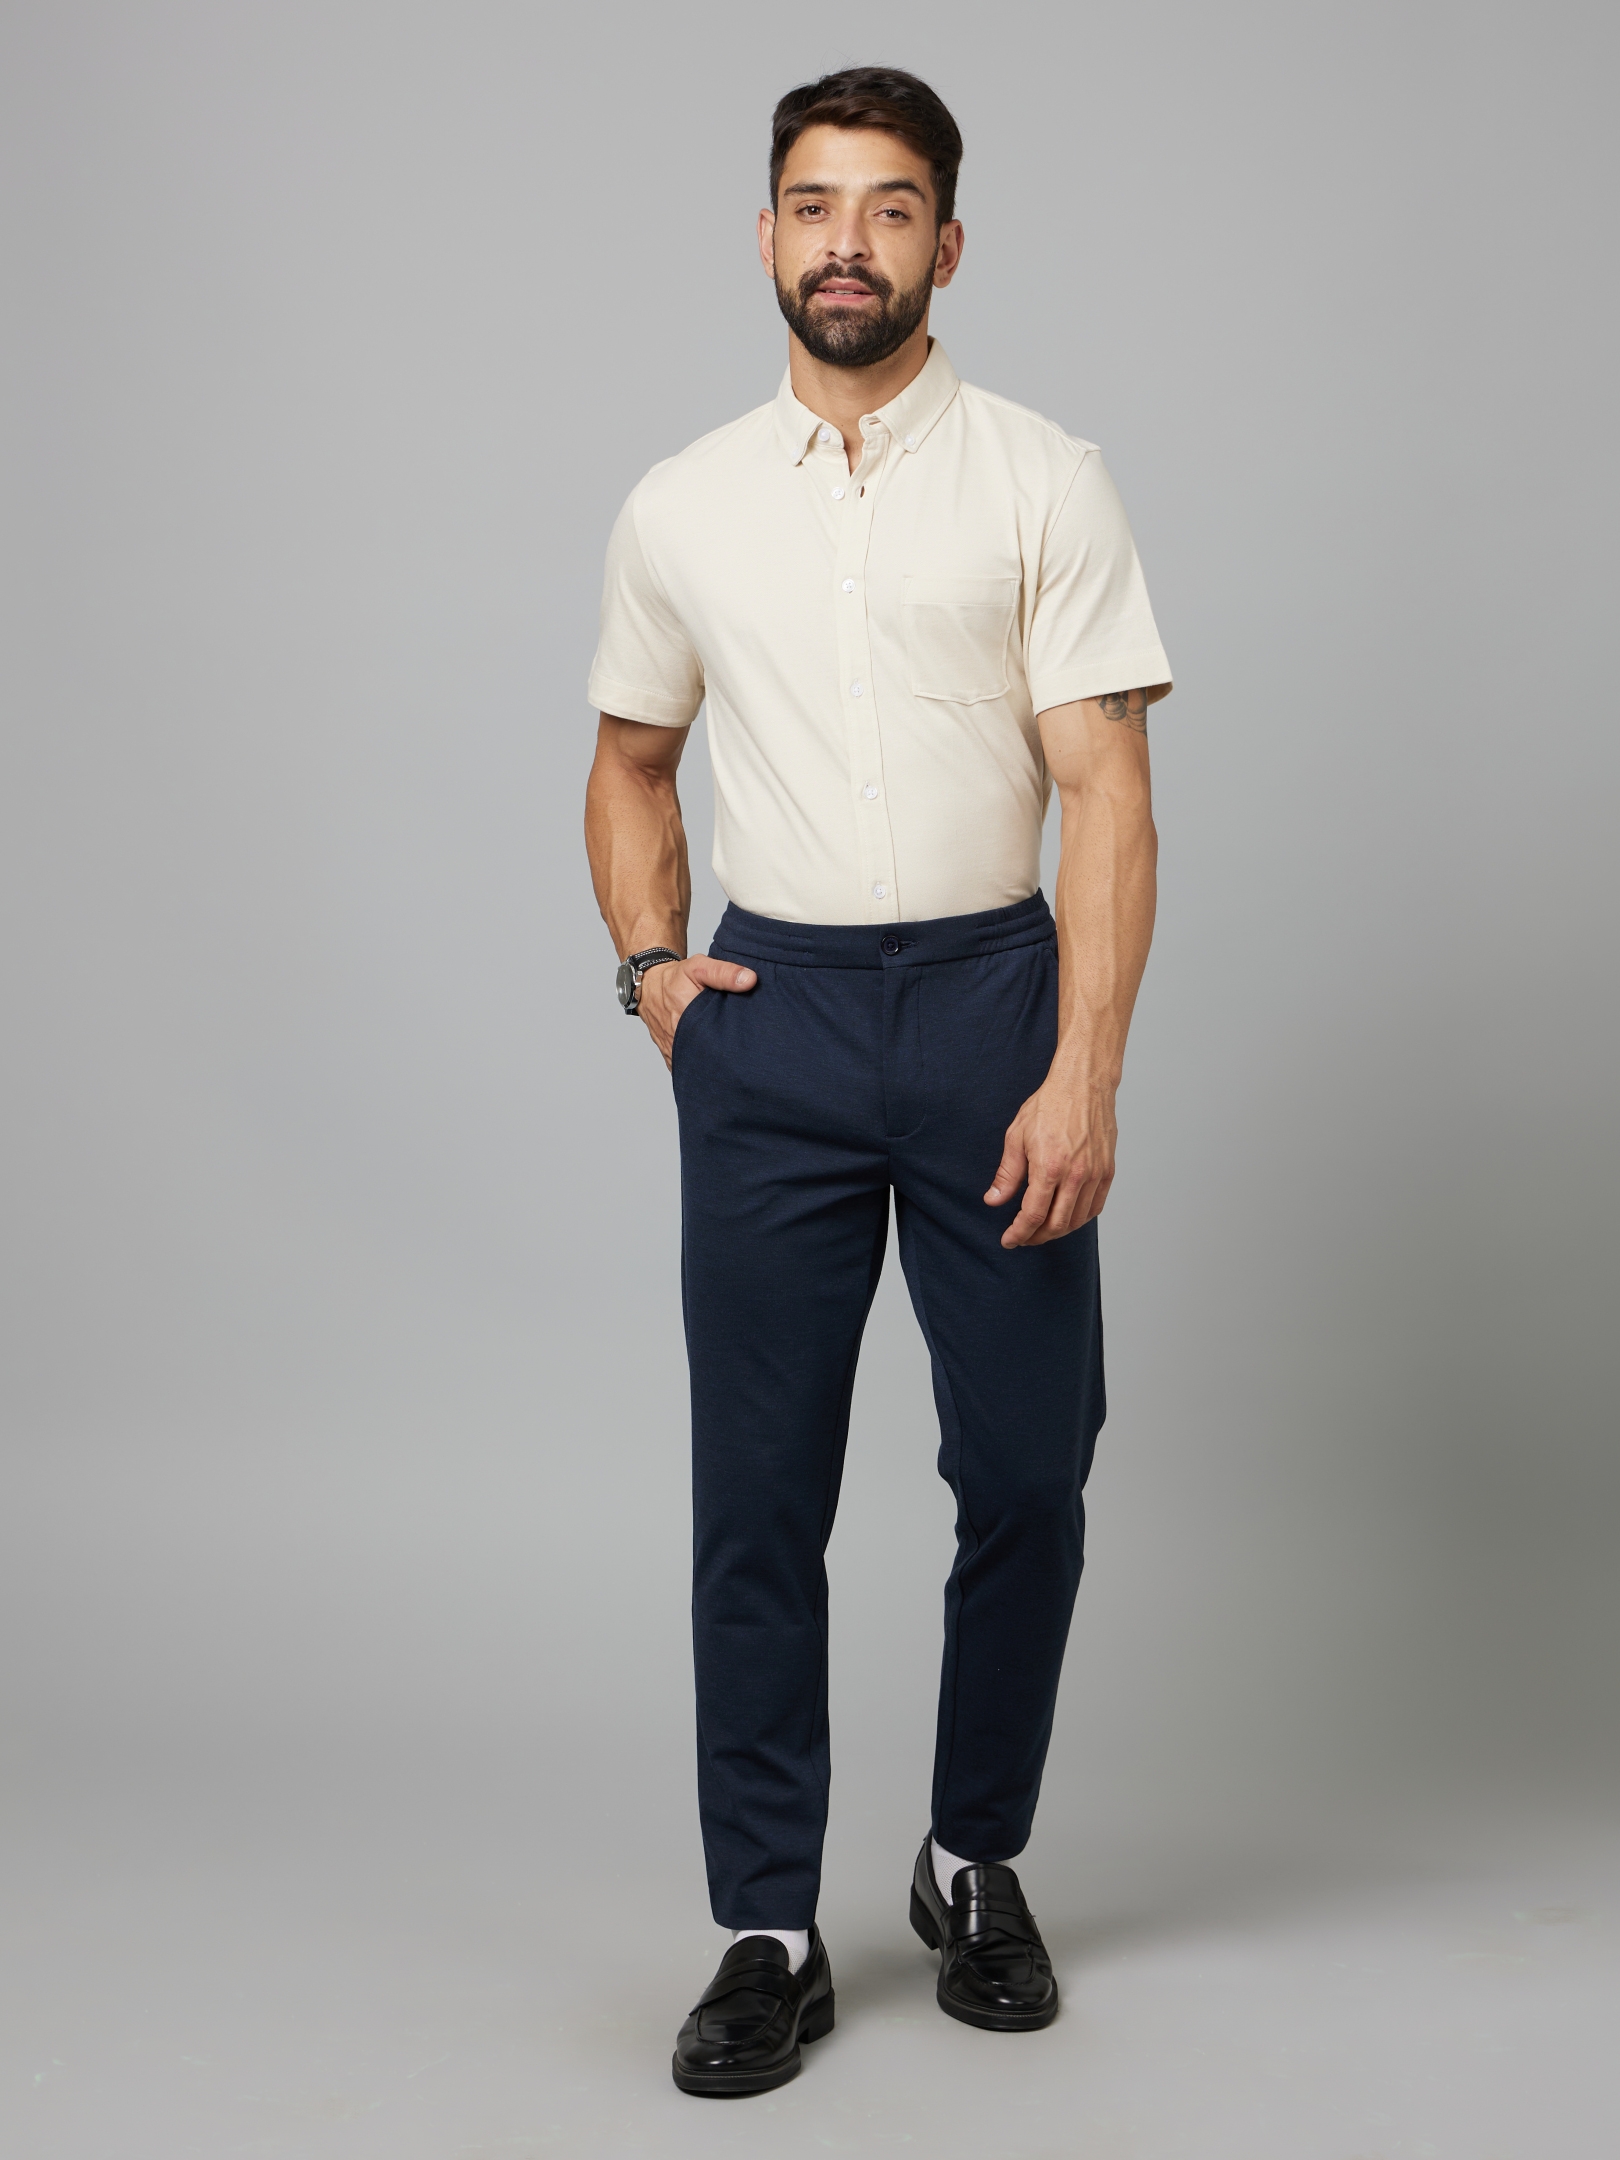 Men's Blue Polyester Solid Trousers